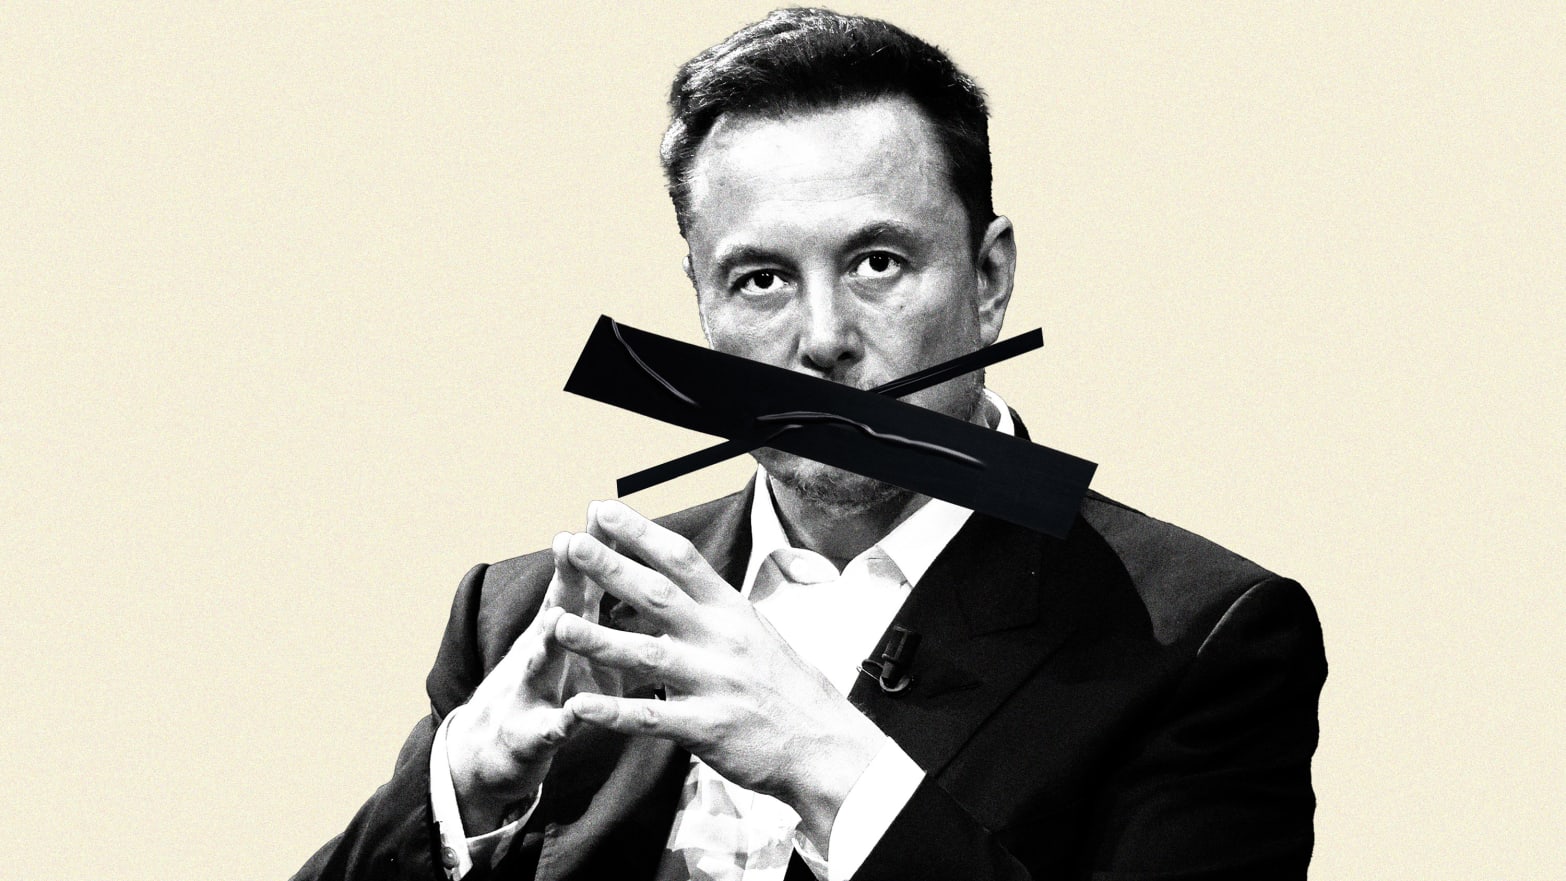 An illustration including photos of Elon Musk and Black Tape